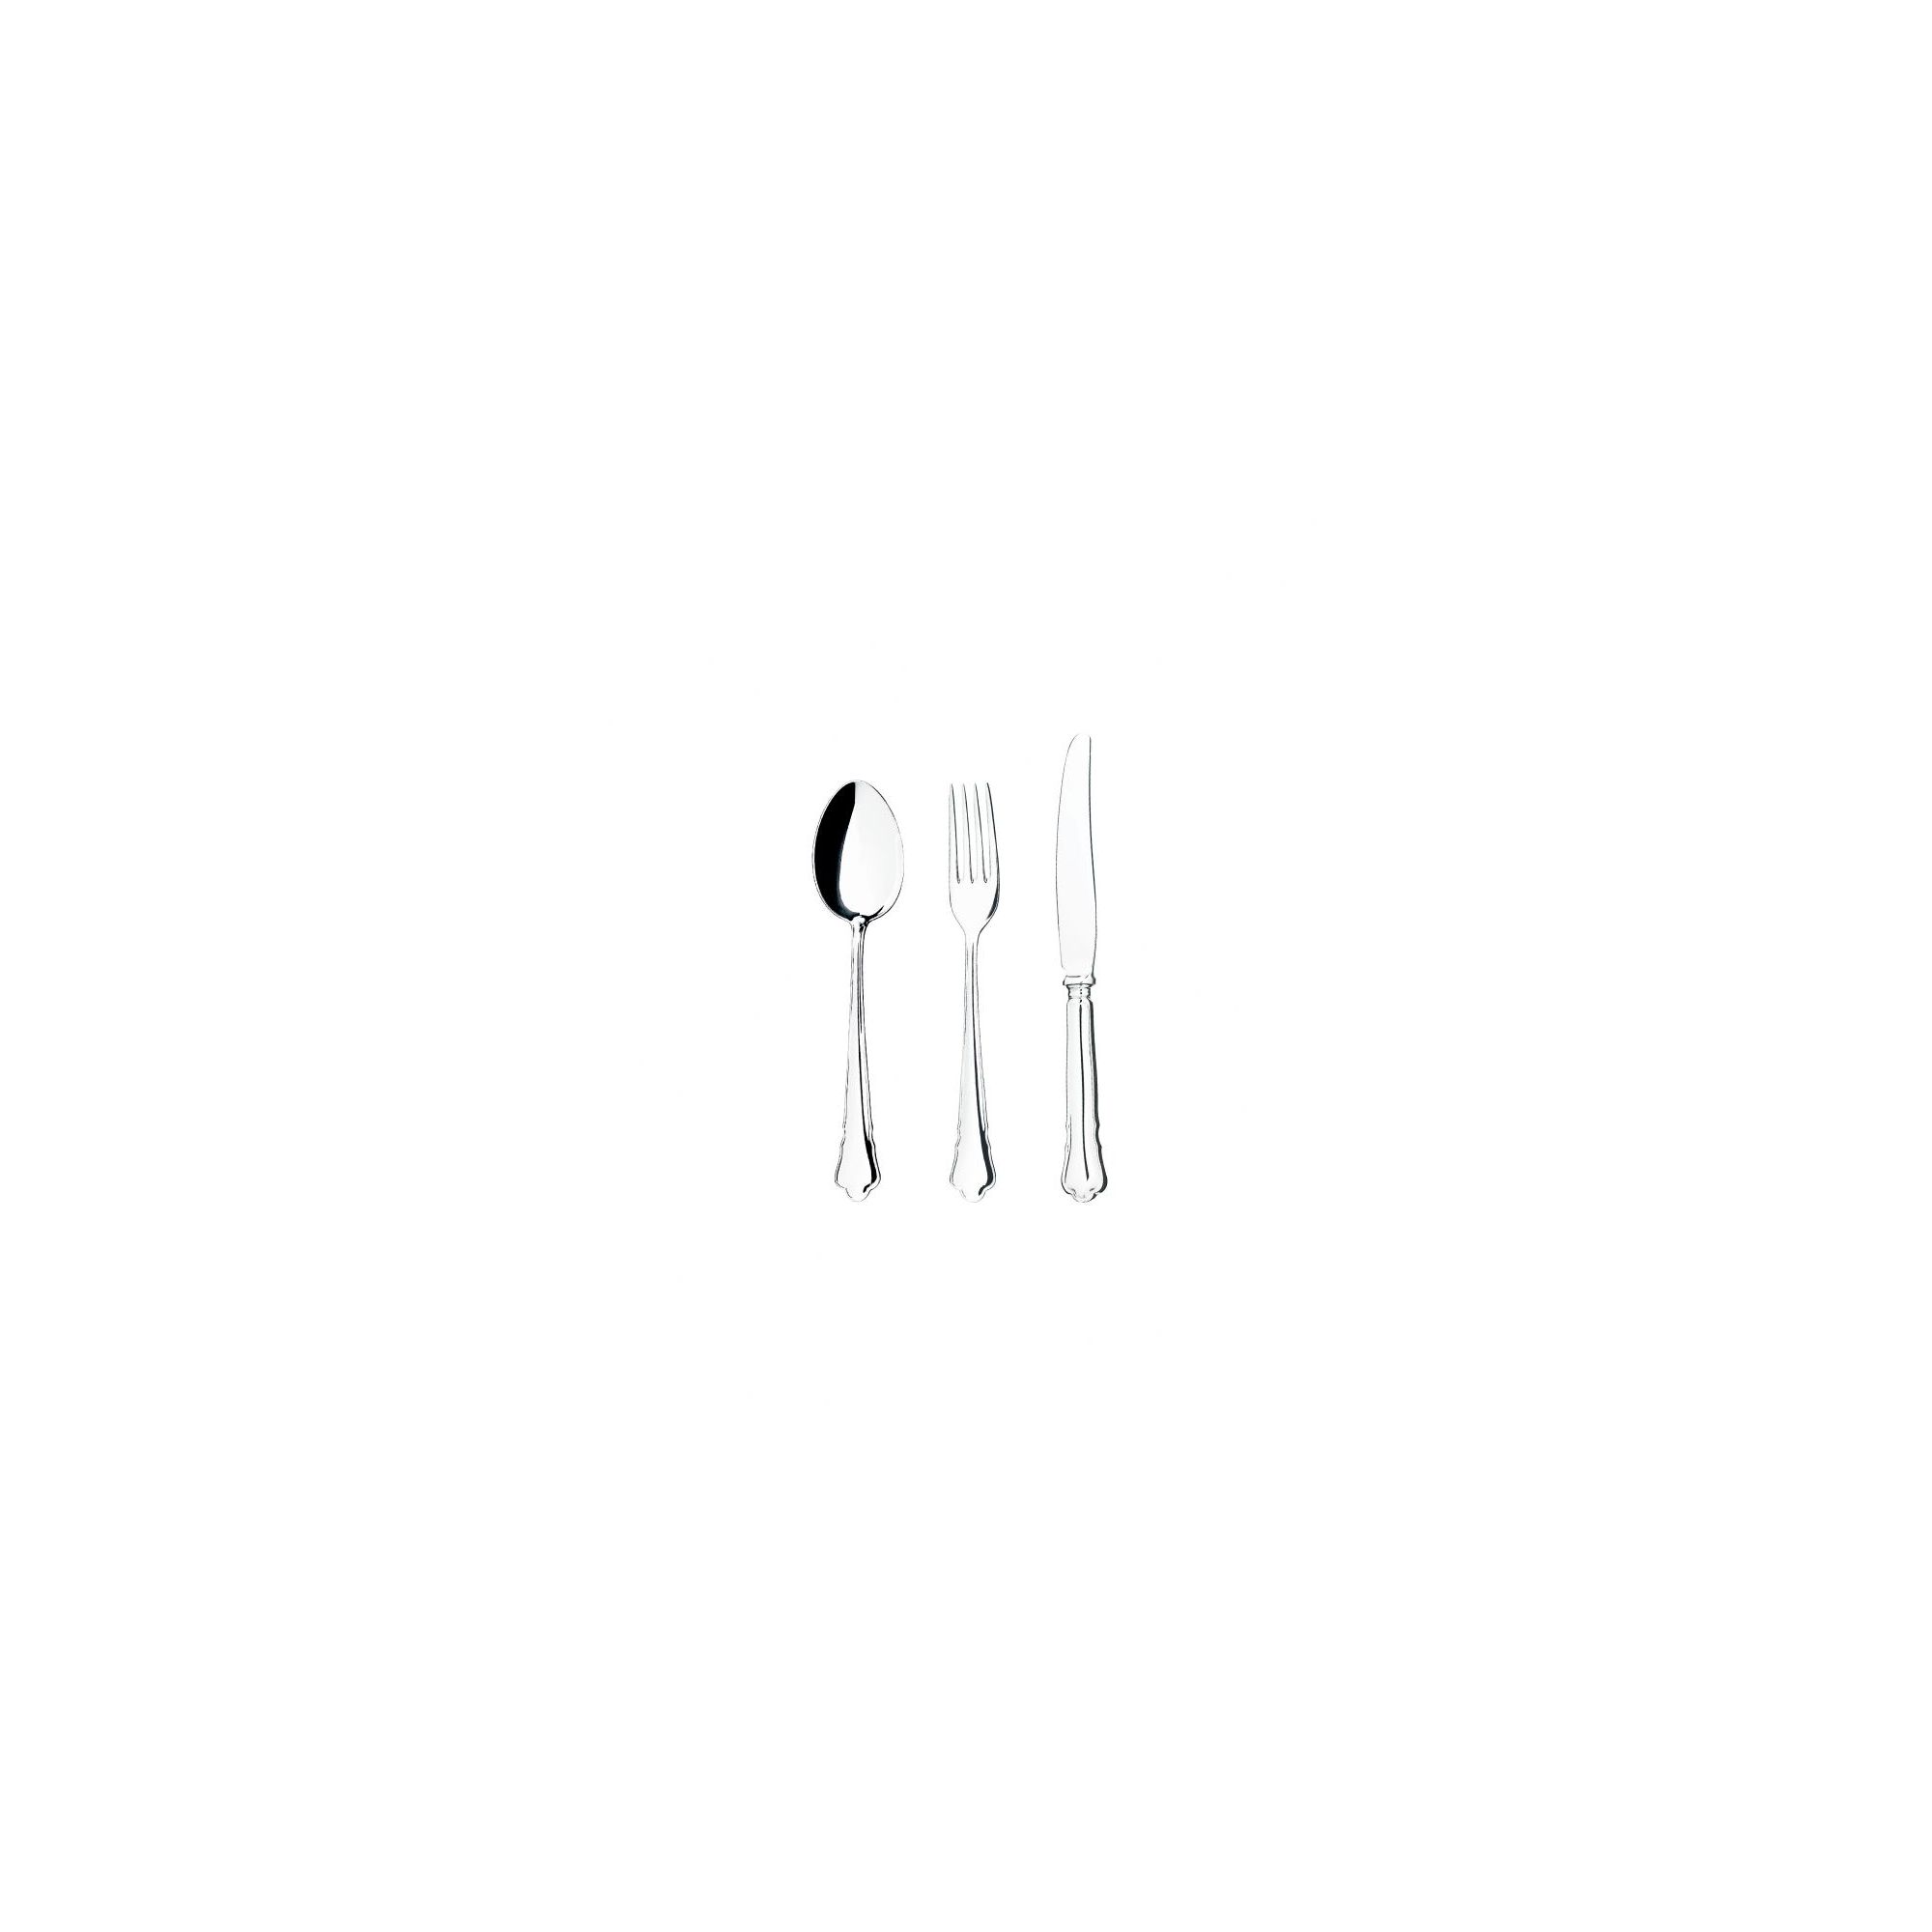 Mema/GAB Chippendale 12 Piece Silver Plated Cutlery Set 2 at Tesco Direct